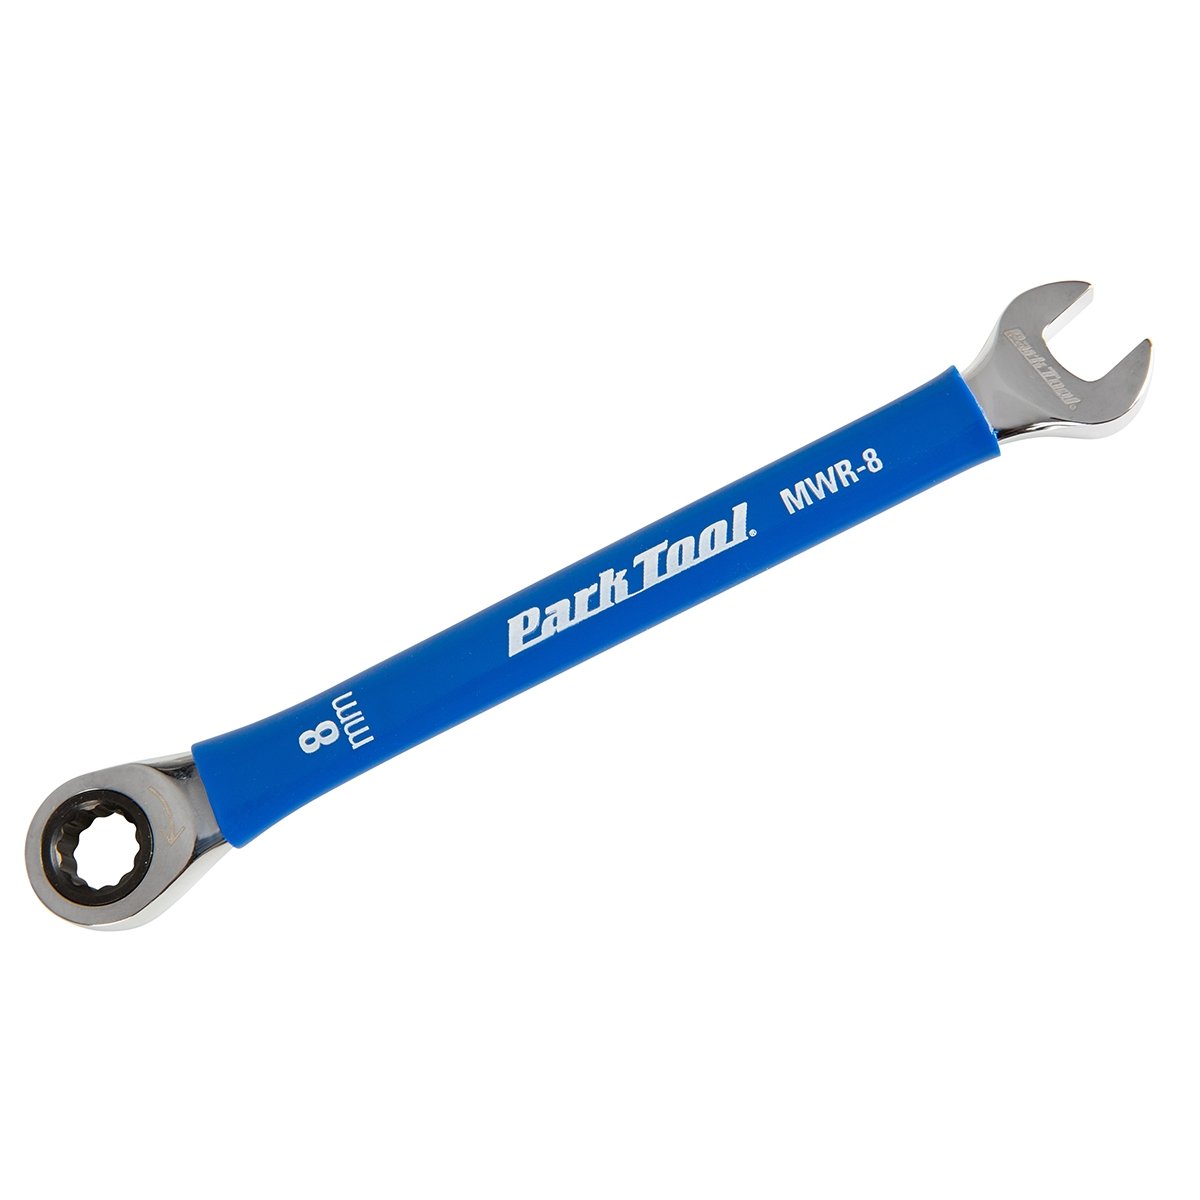 Park Tool Combination ratchet wrench MWR-8 8 mm